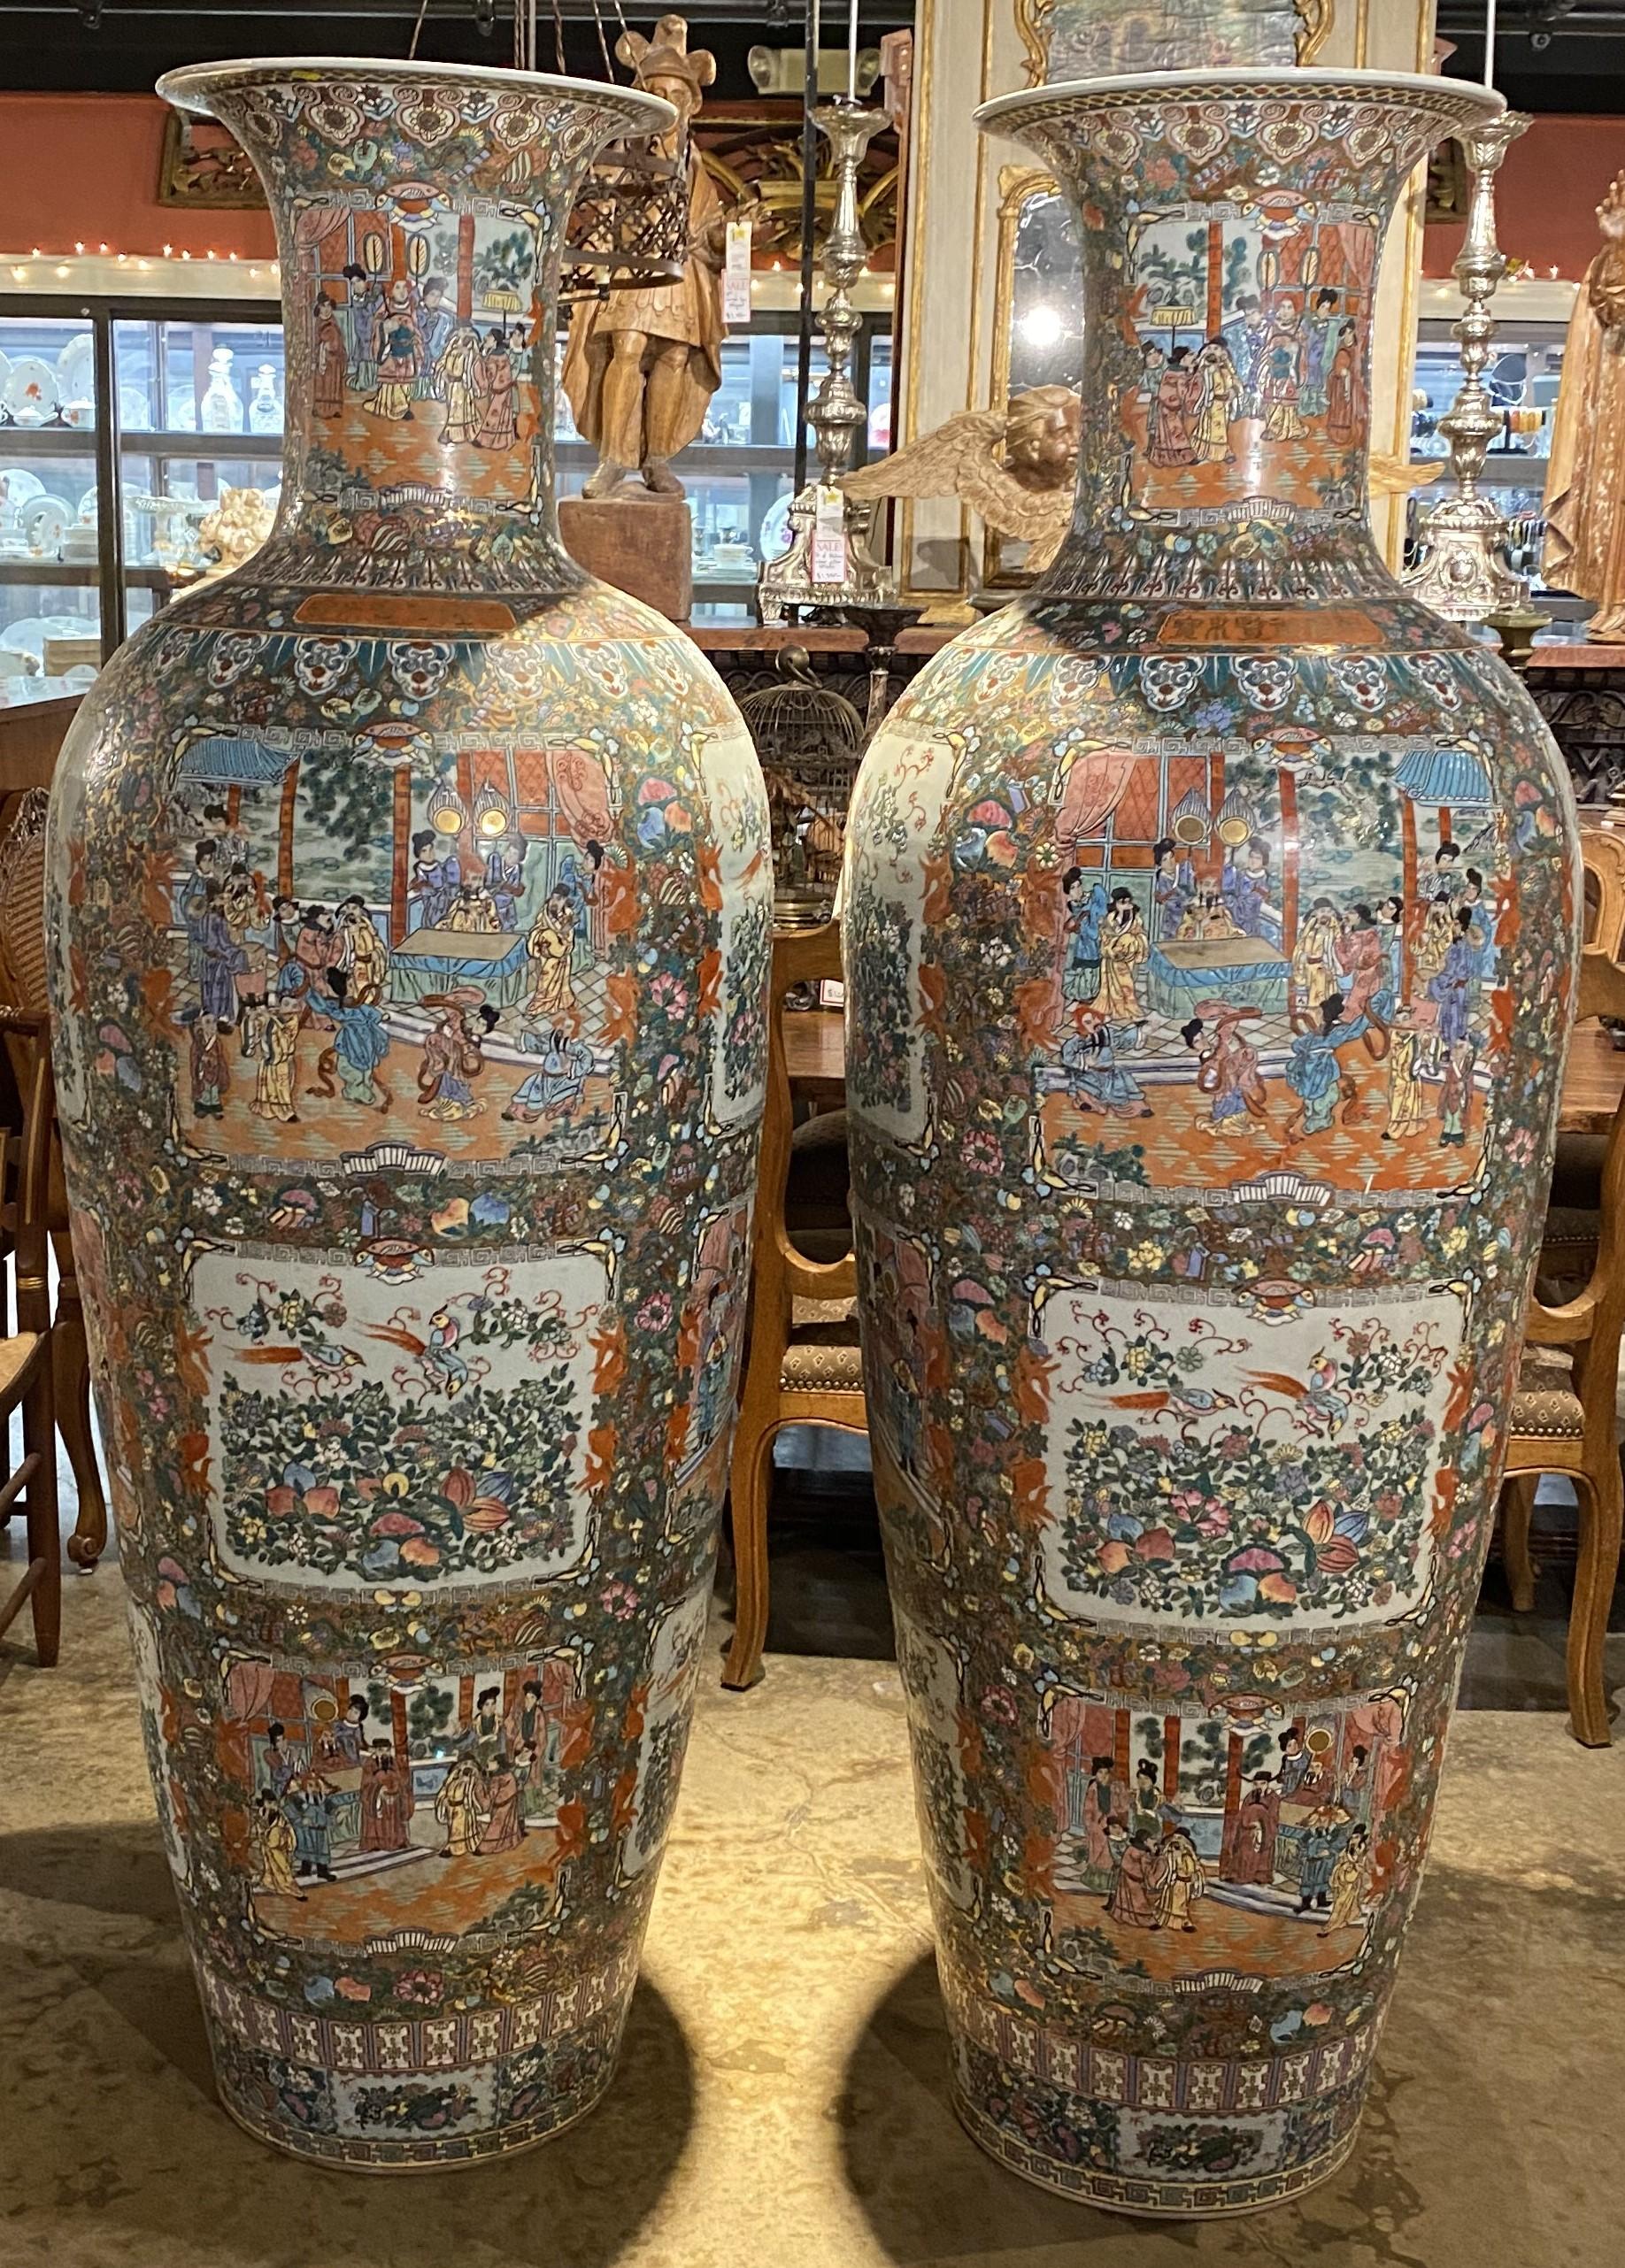 An exceptional pair of polychrome Chinese Rose Medallion palace vases of monumental size with flared decorated lips, several different cartouche scenes of birds, flowers, and interior scenes with figures, surrounded by geometric, floral and